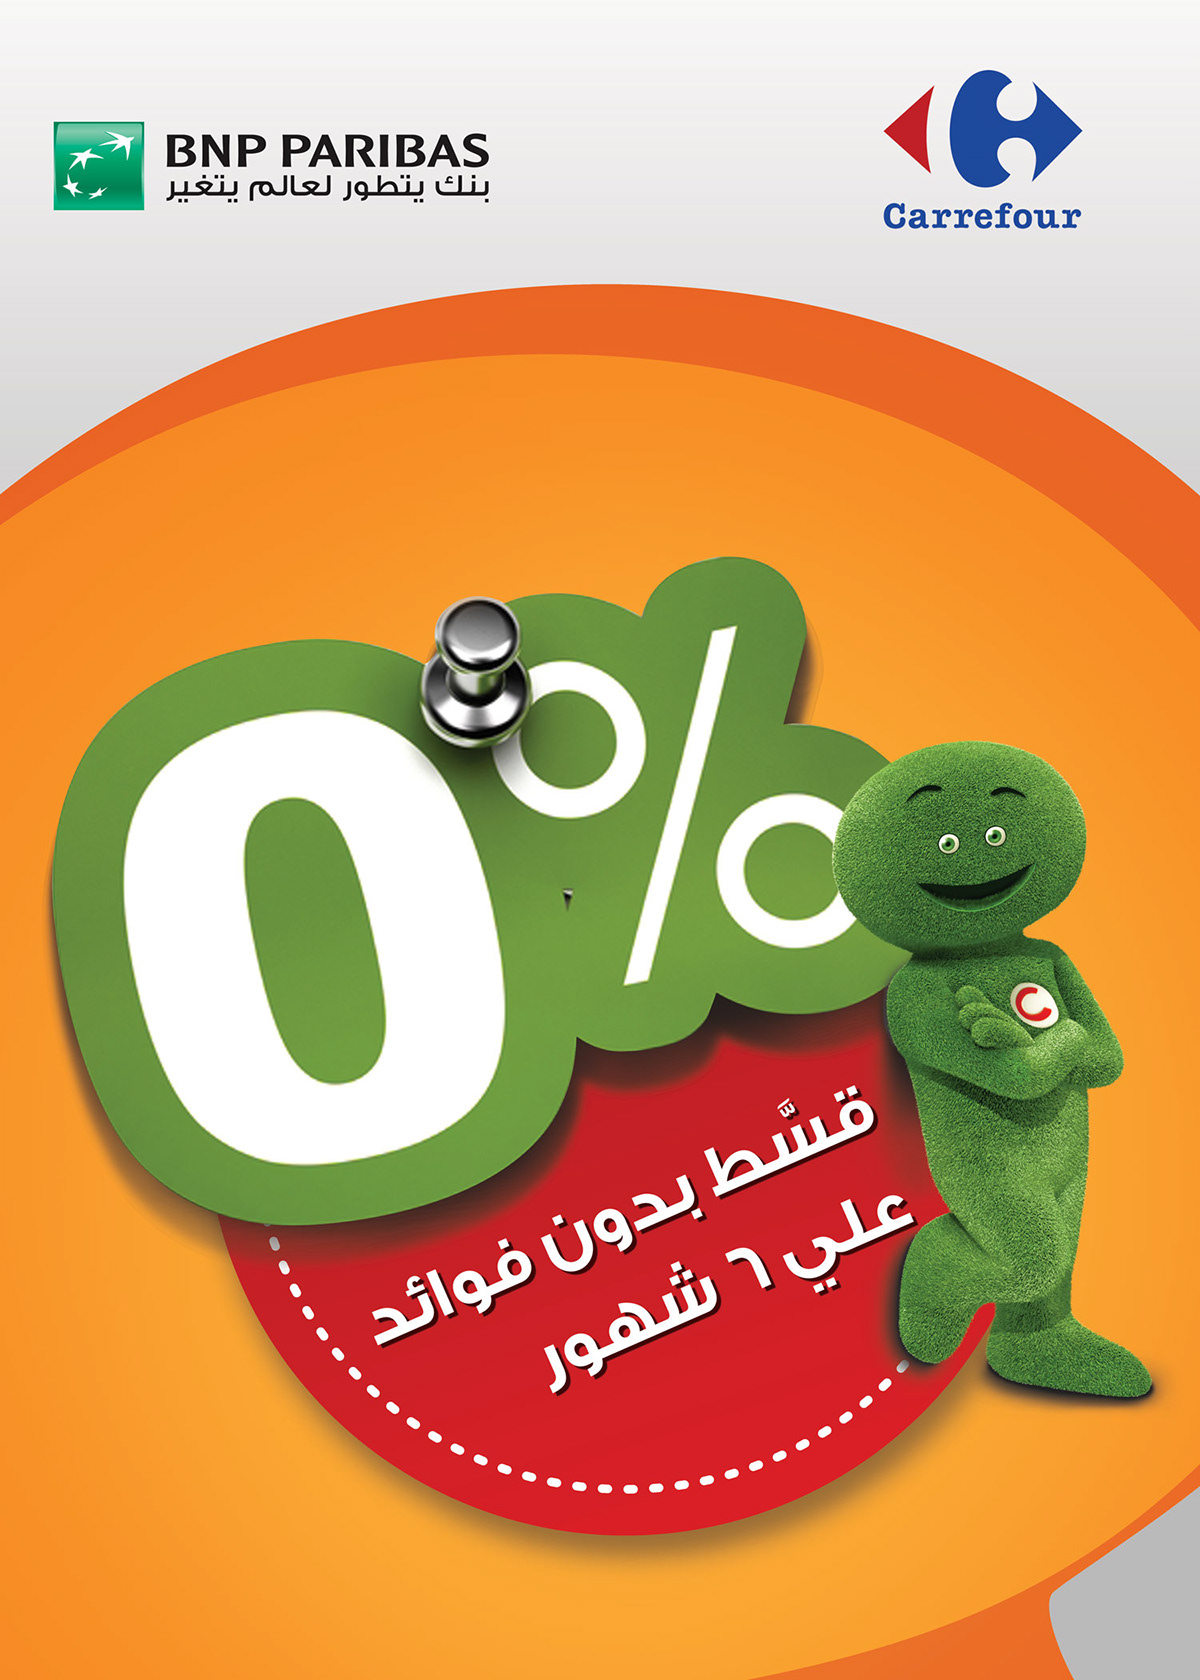 Carrefour ads